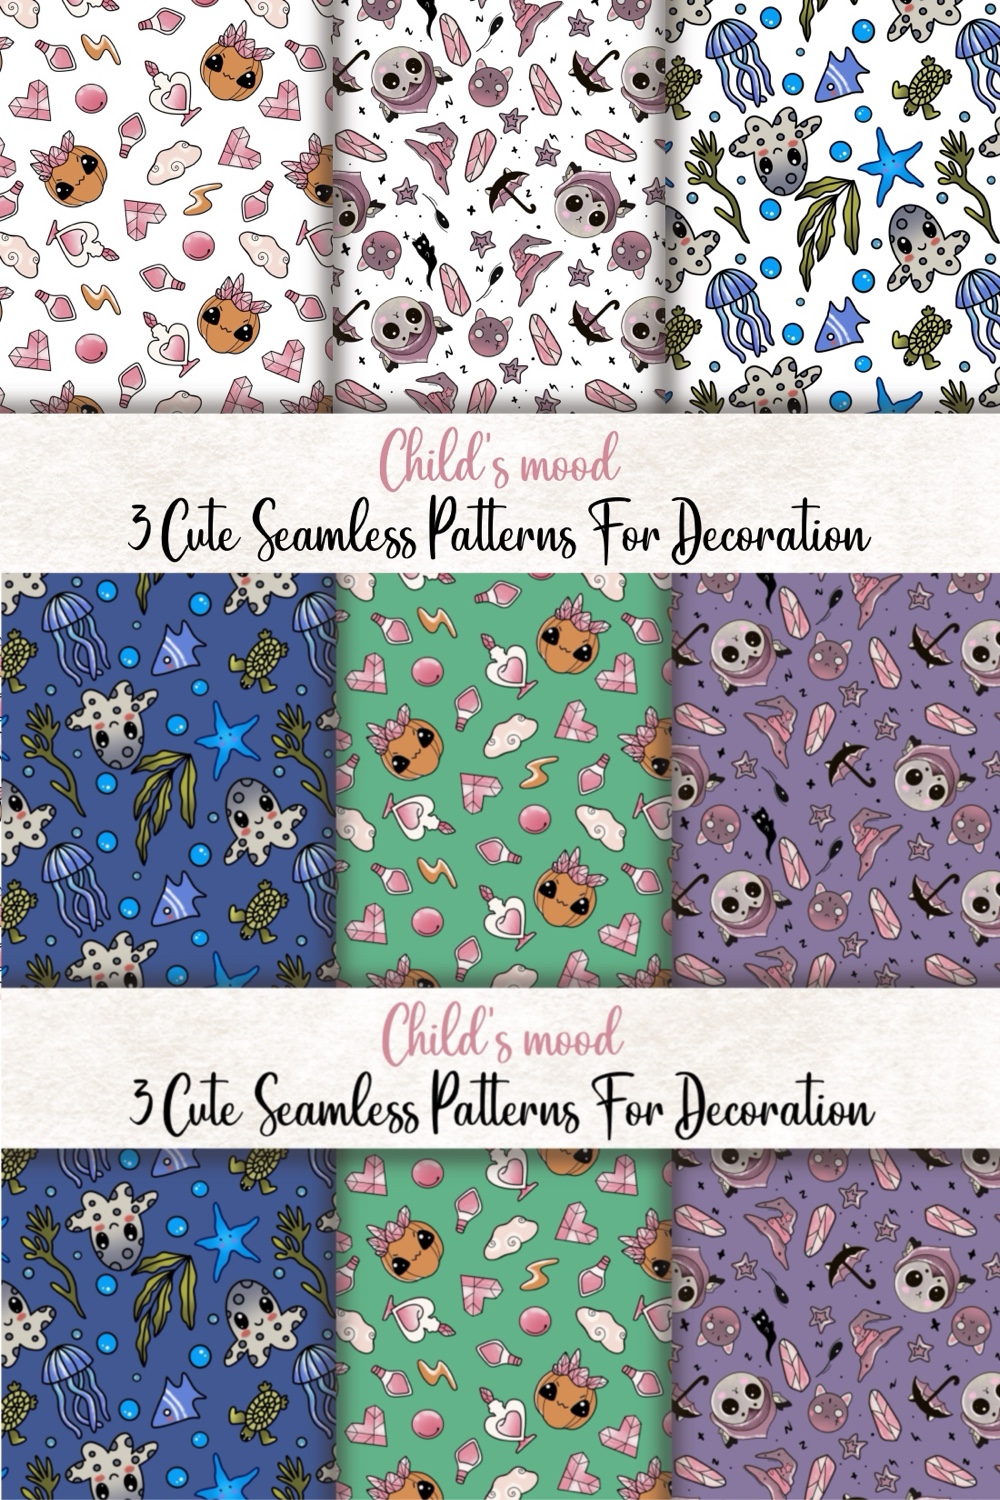 Child’s mood 3 cute seamless patterns for decoration pinterest preview image.